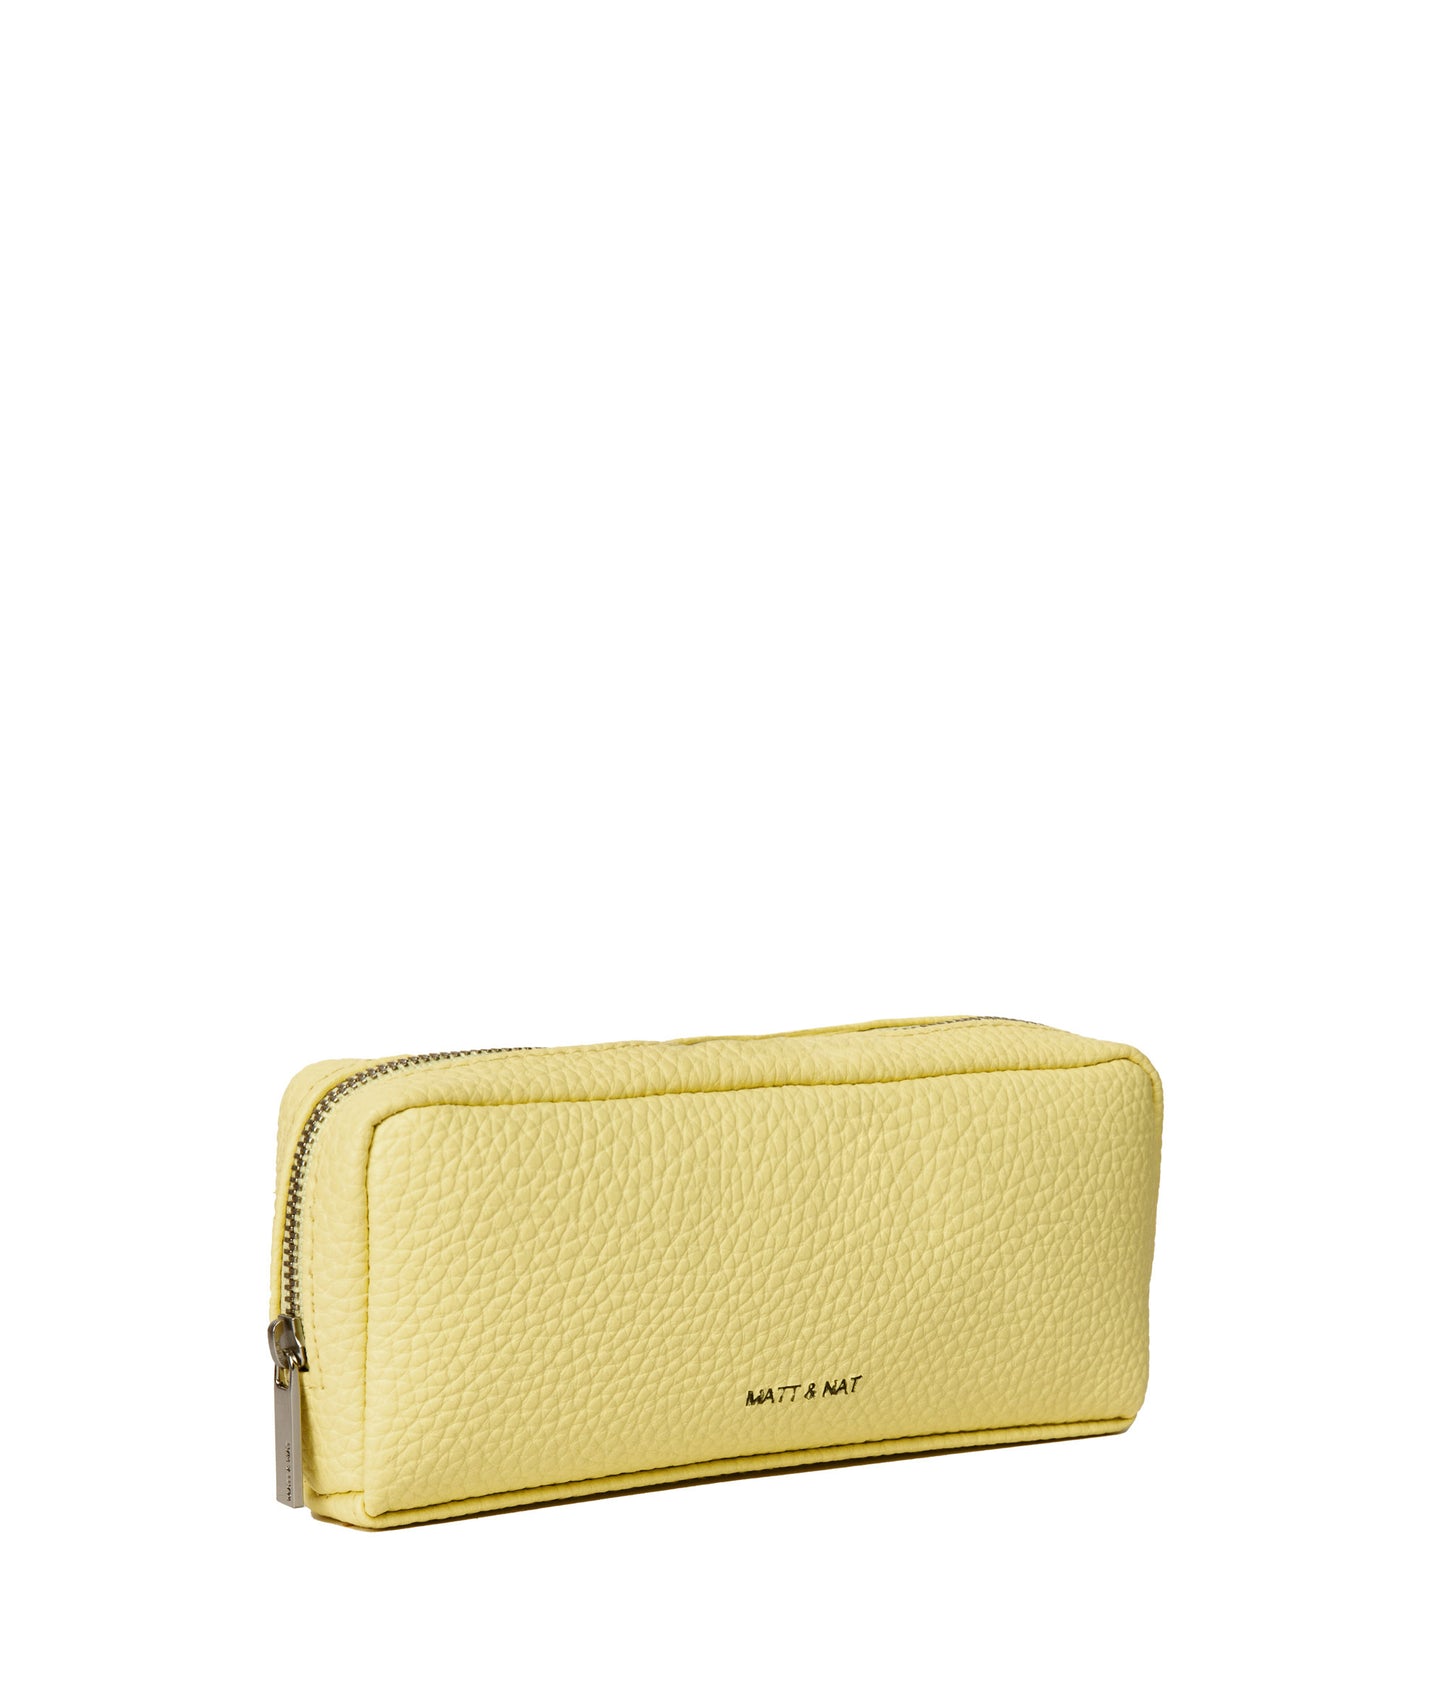 GROVE Sunglasses Case - Purity | Color: Yellow - variant::daffodil